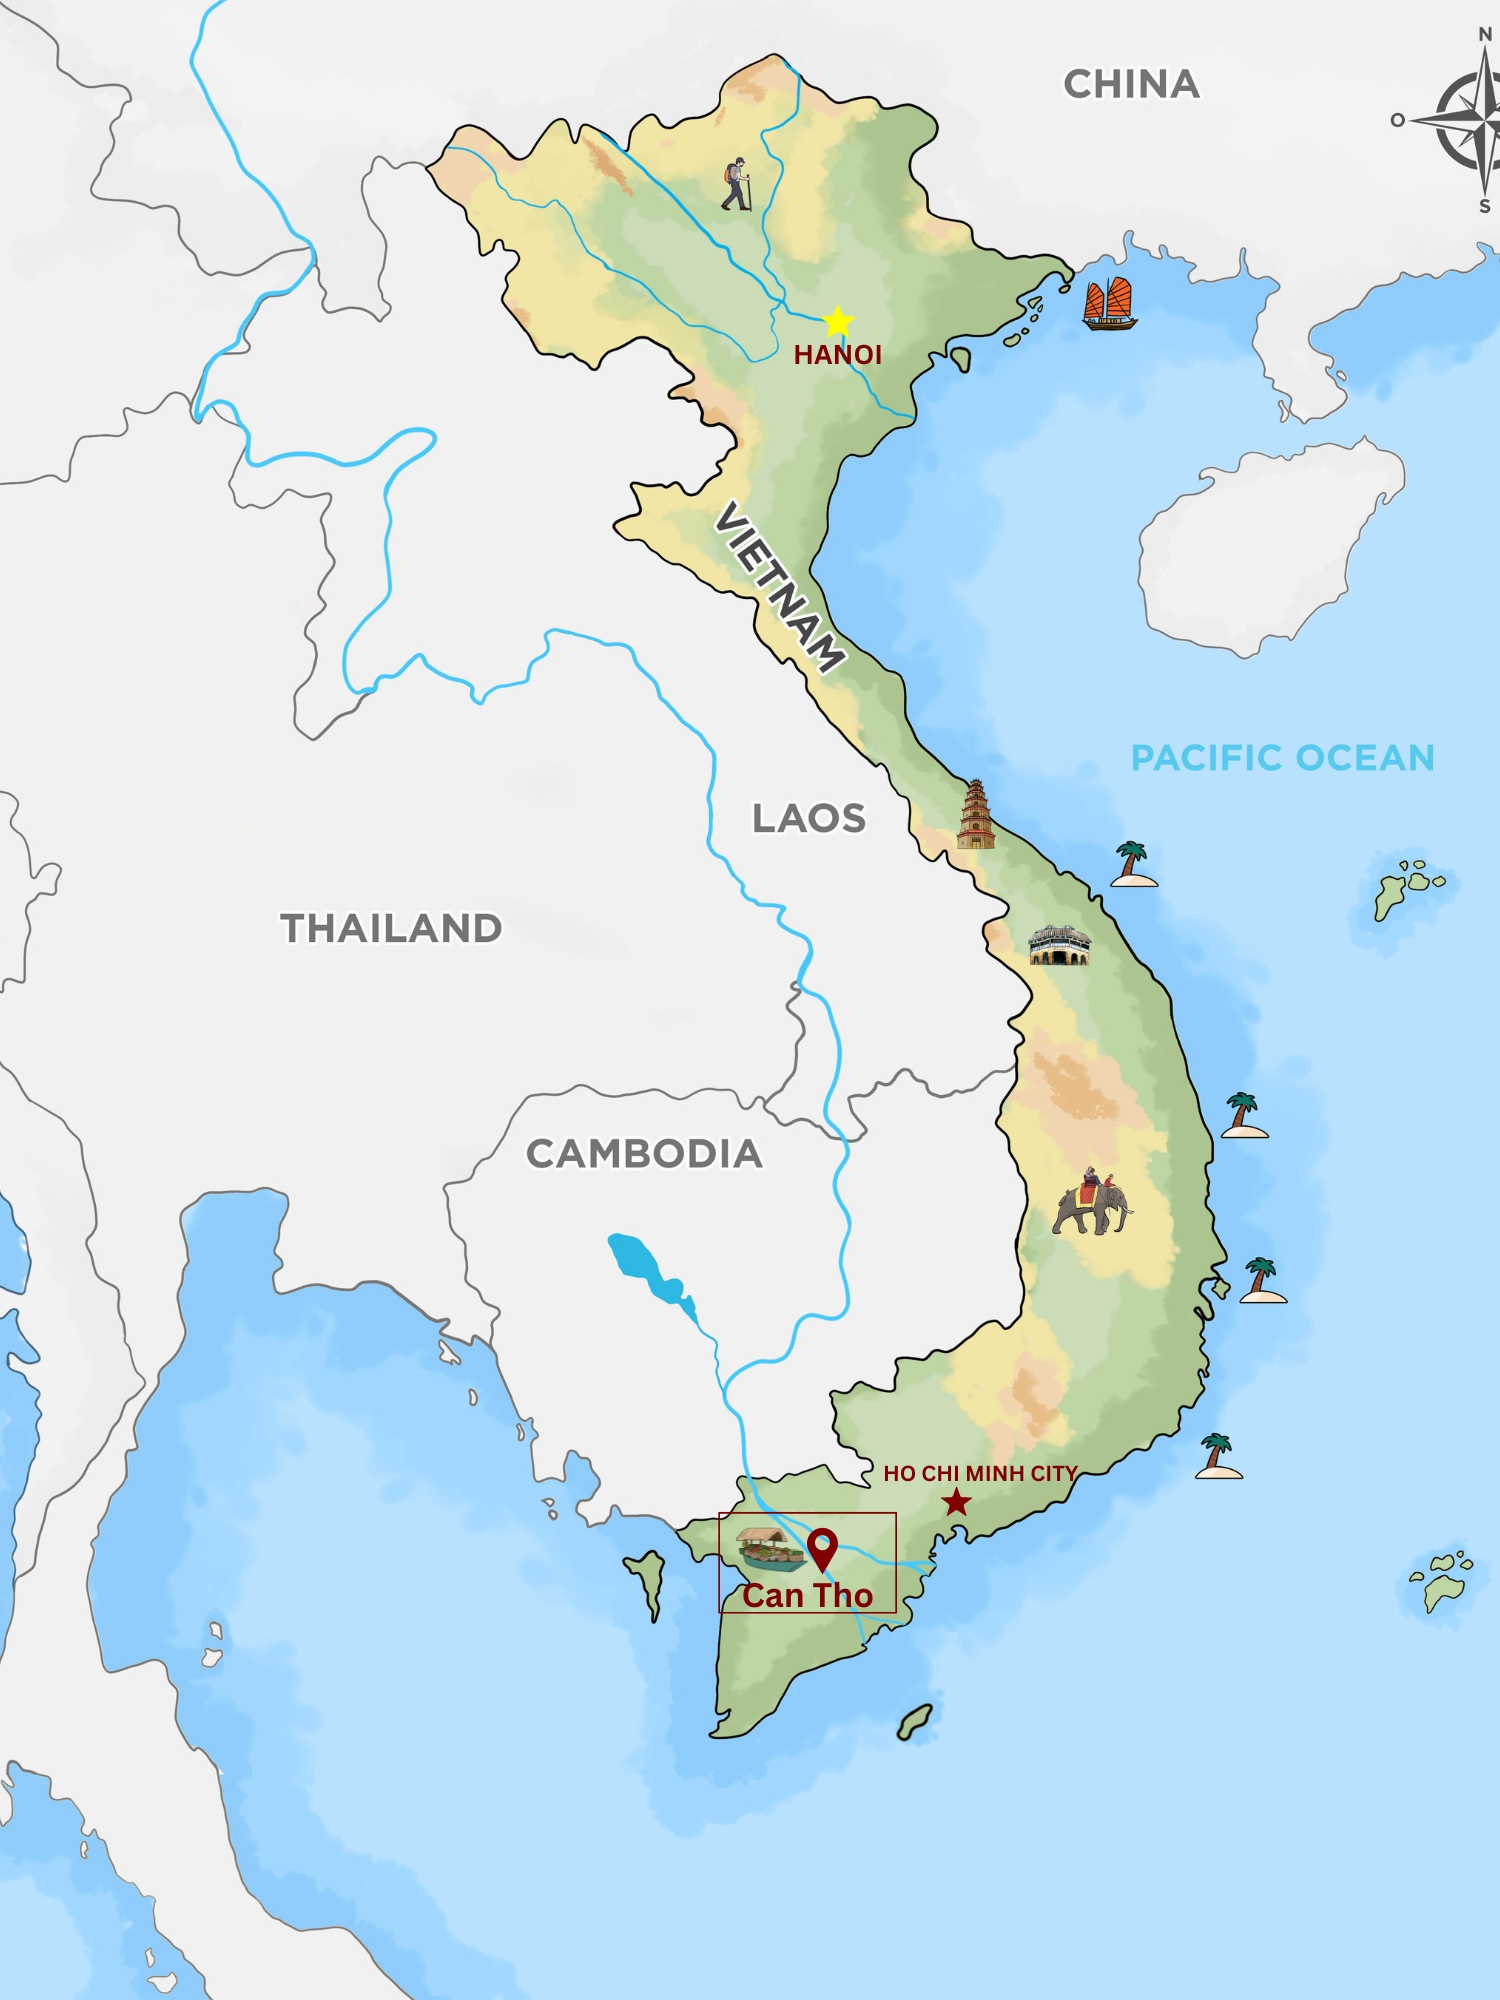 Can Tho is located in the south of Vietnam, in the Mekong Delta